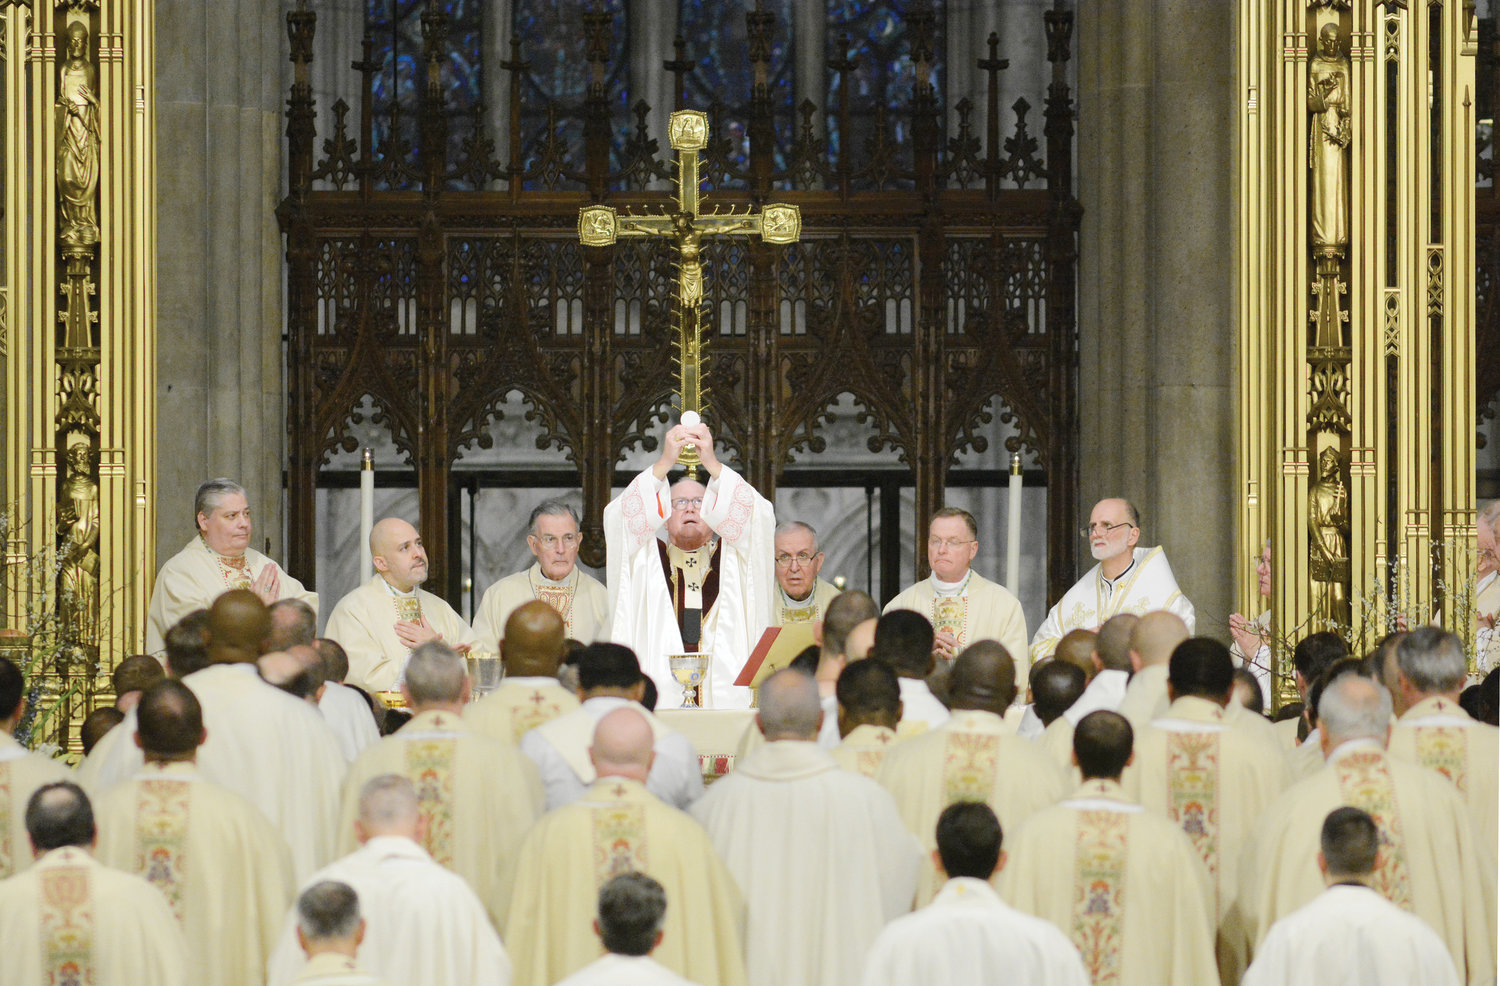 Cardinal Dolan elevates the Eucharist during the Chrism Mass April 12 as bishops and priests fill the sanctuary of St. Patrick’s Cathedral.